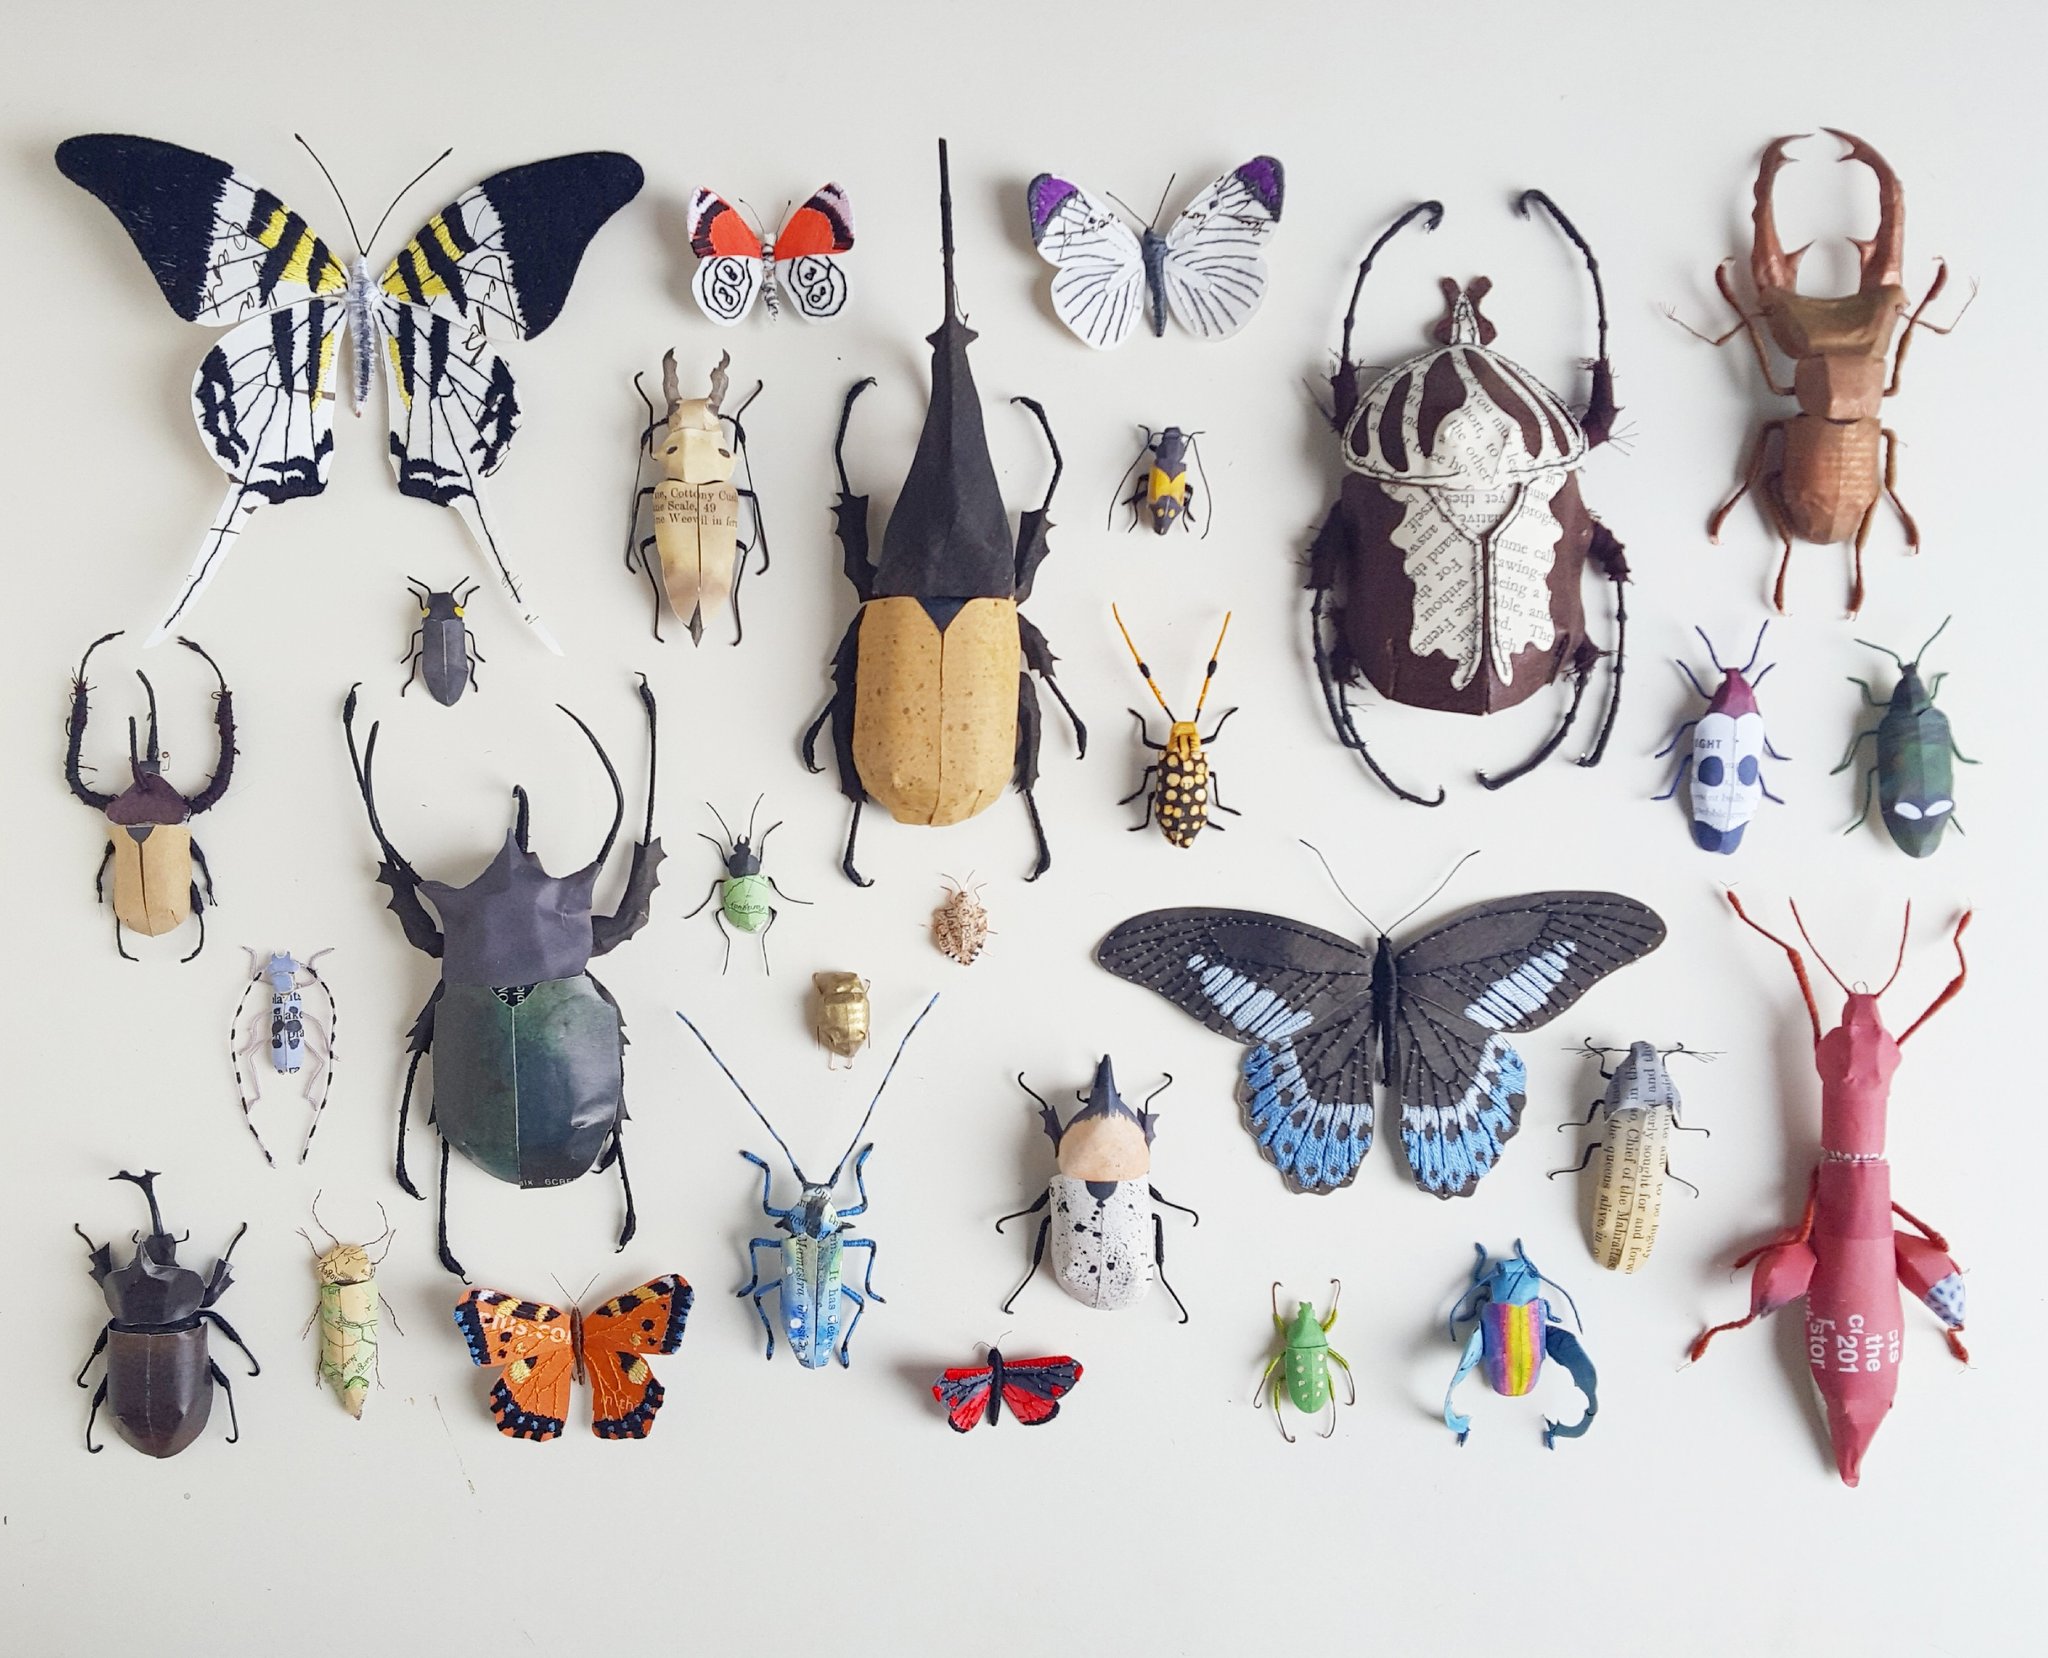 niece patron Fejlfri Kate Kato on Twitter: "My insects are made mostly from recycled paper.  Their bodies are carved from rolls of it &amp; their shells are cut &amp;  attached. Their legs are made from